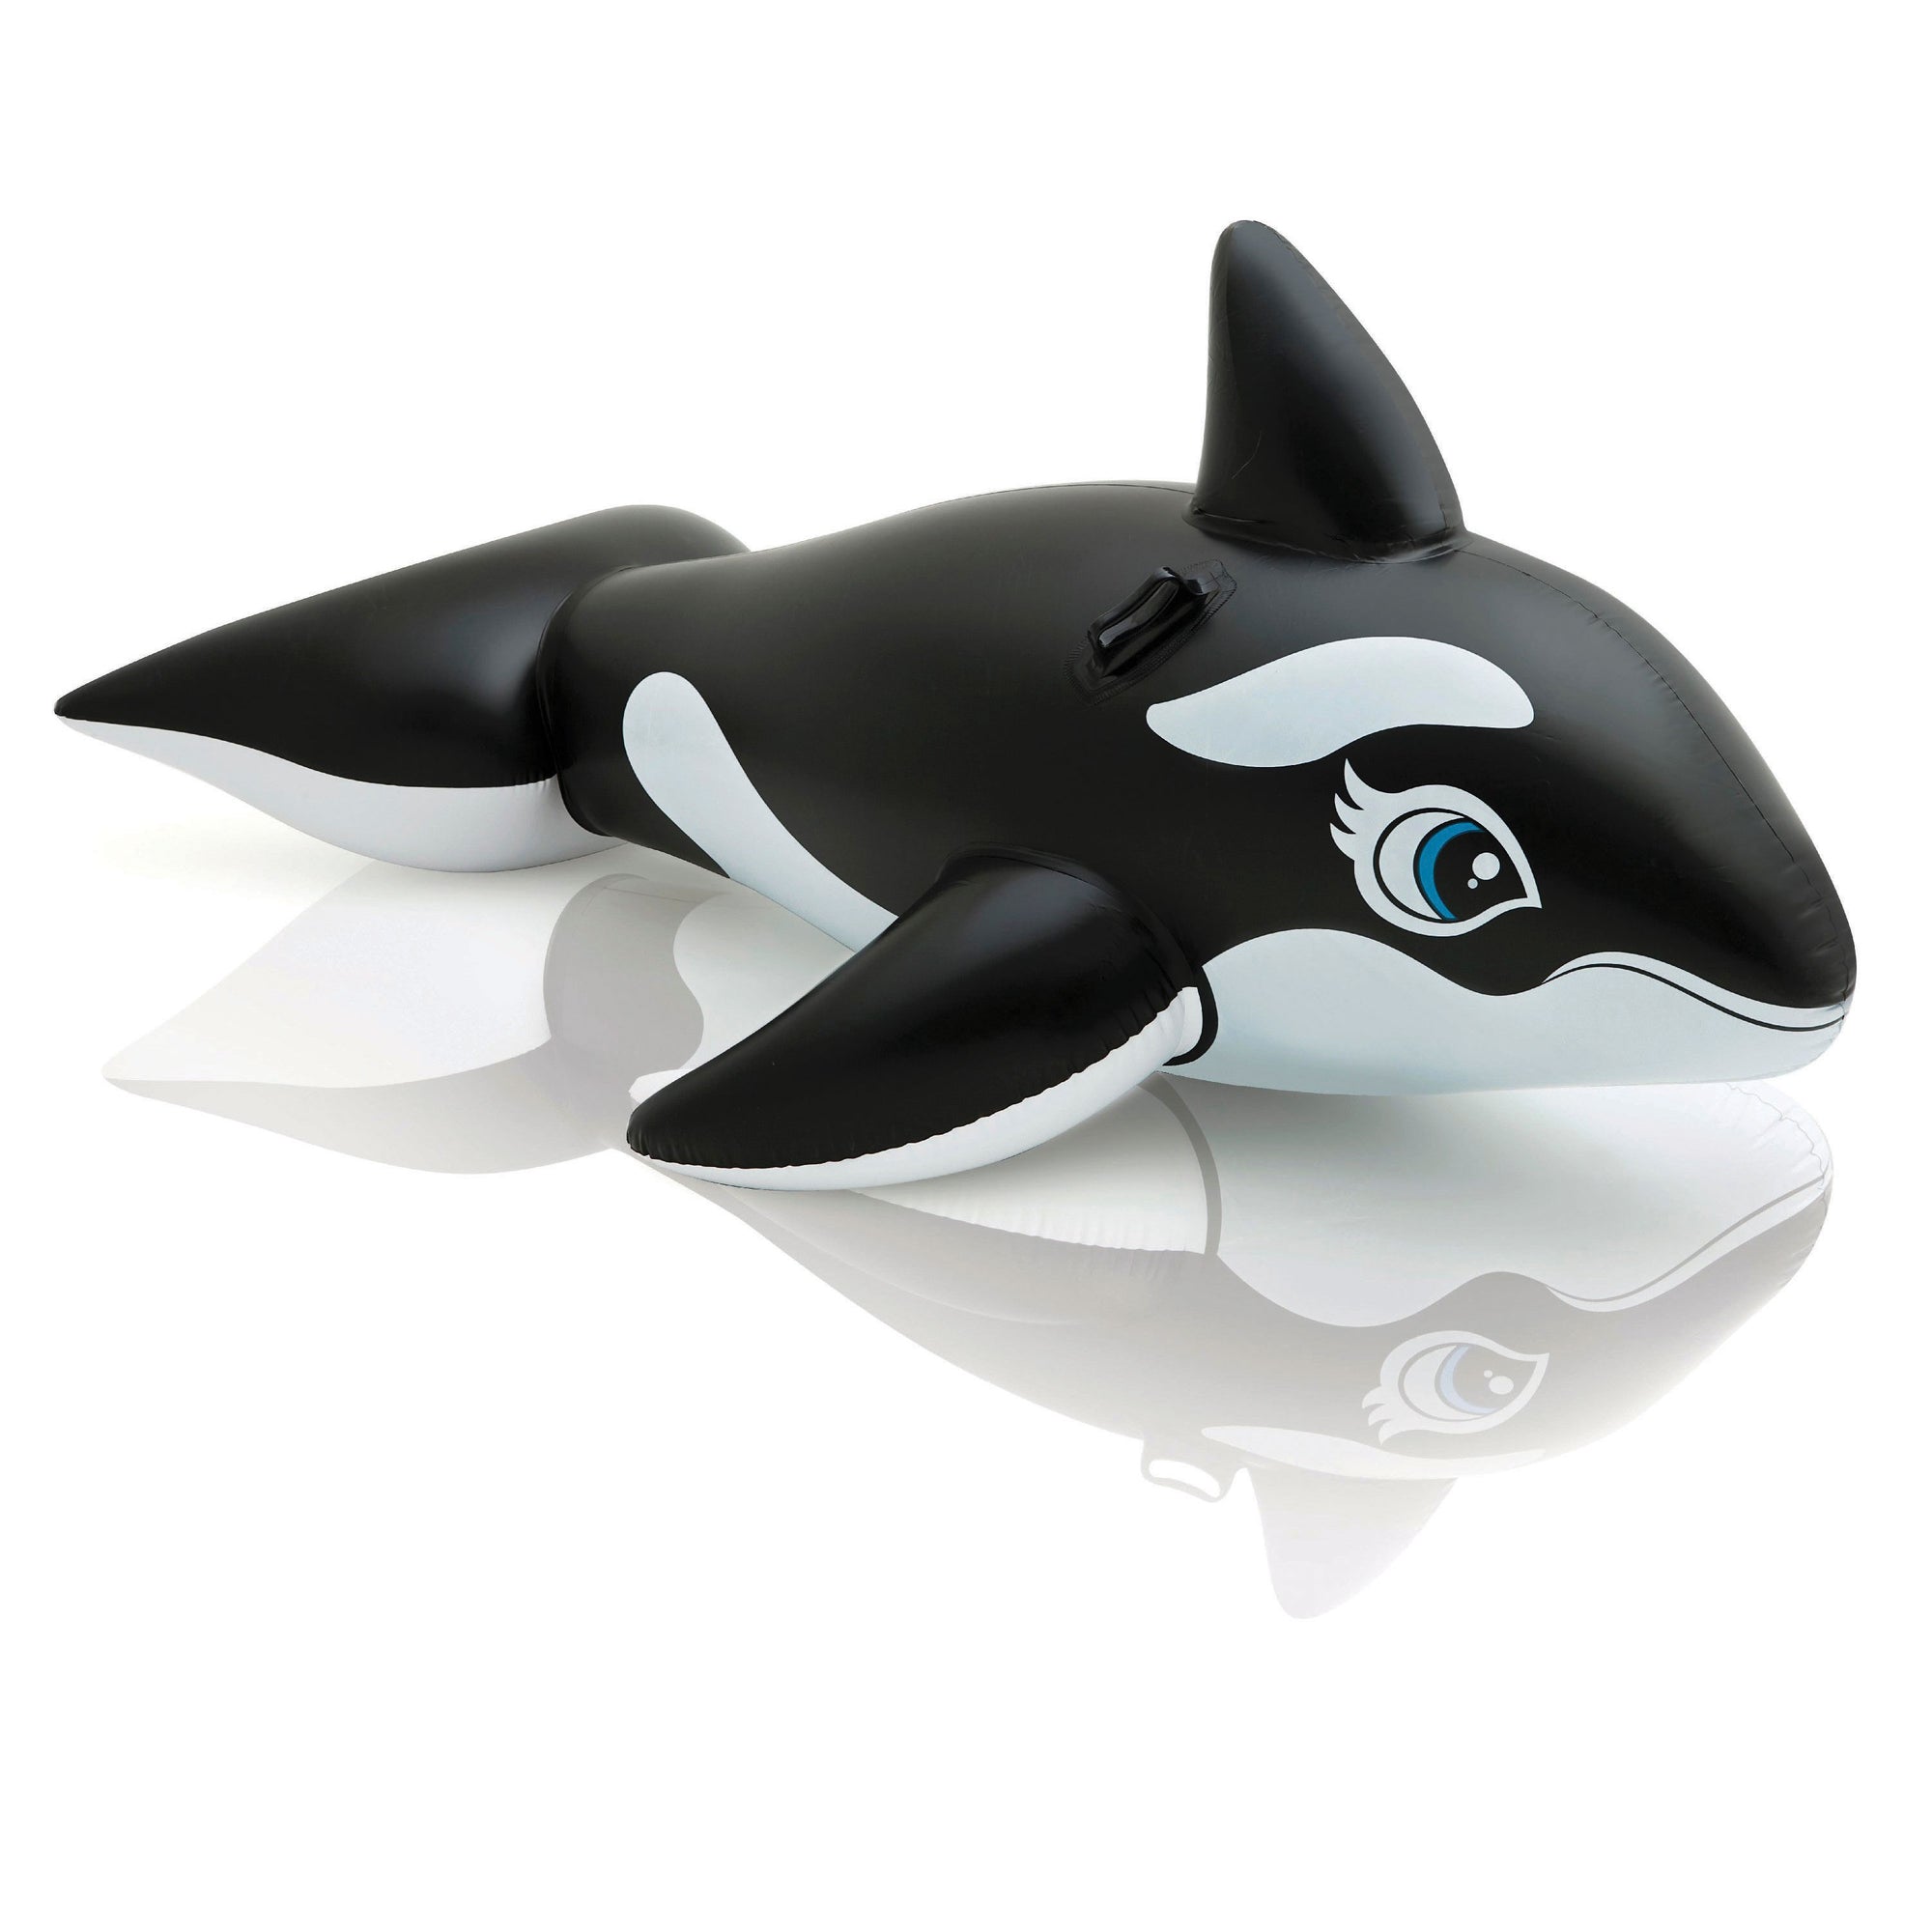 Intex 58561EP Whale Ride-On